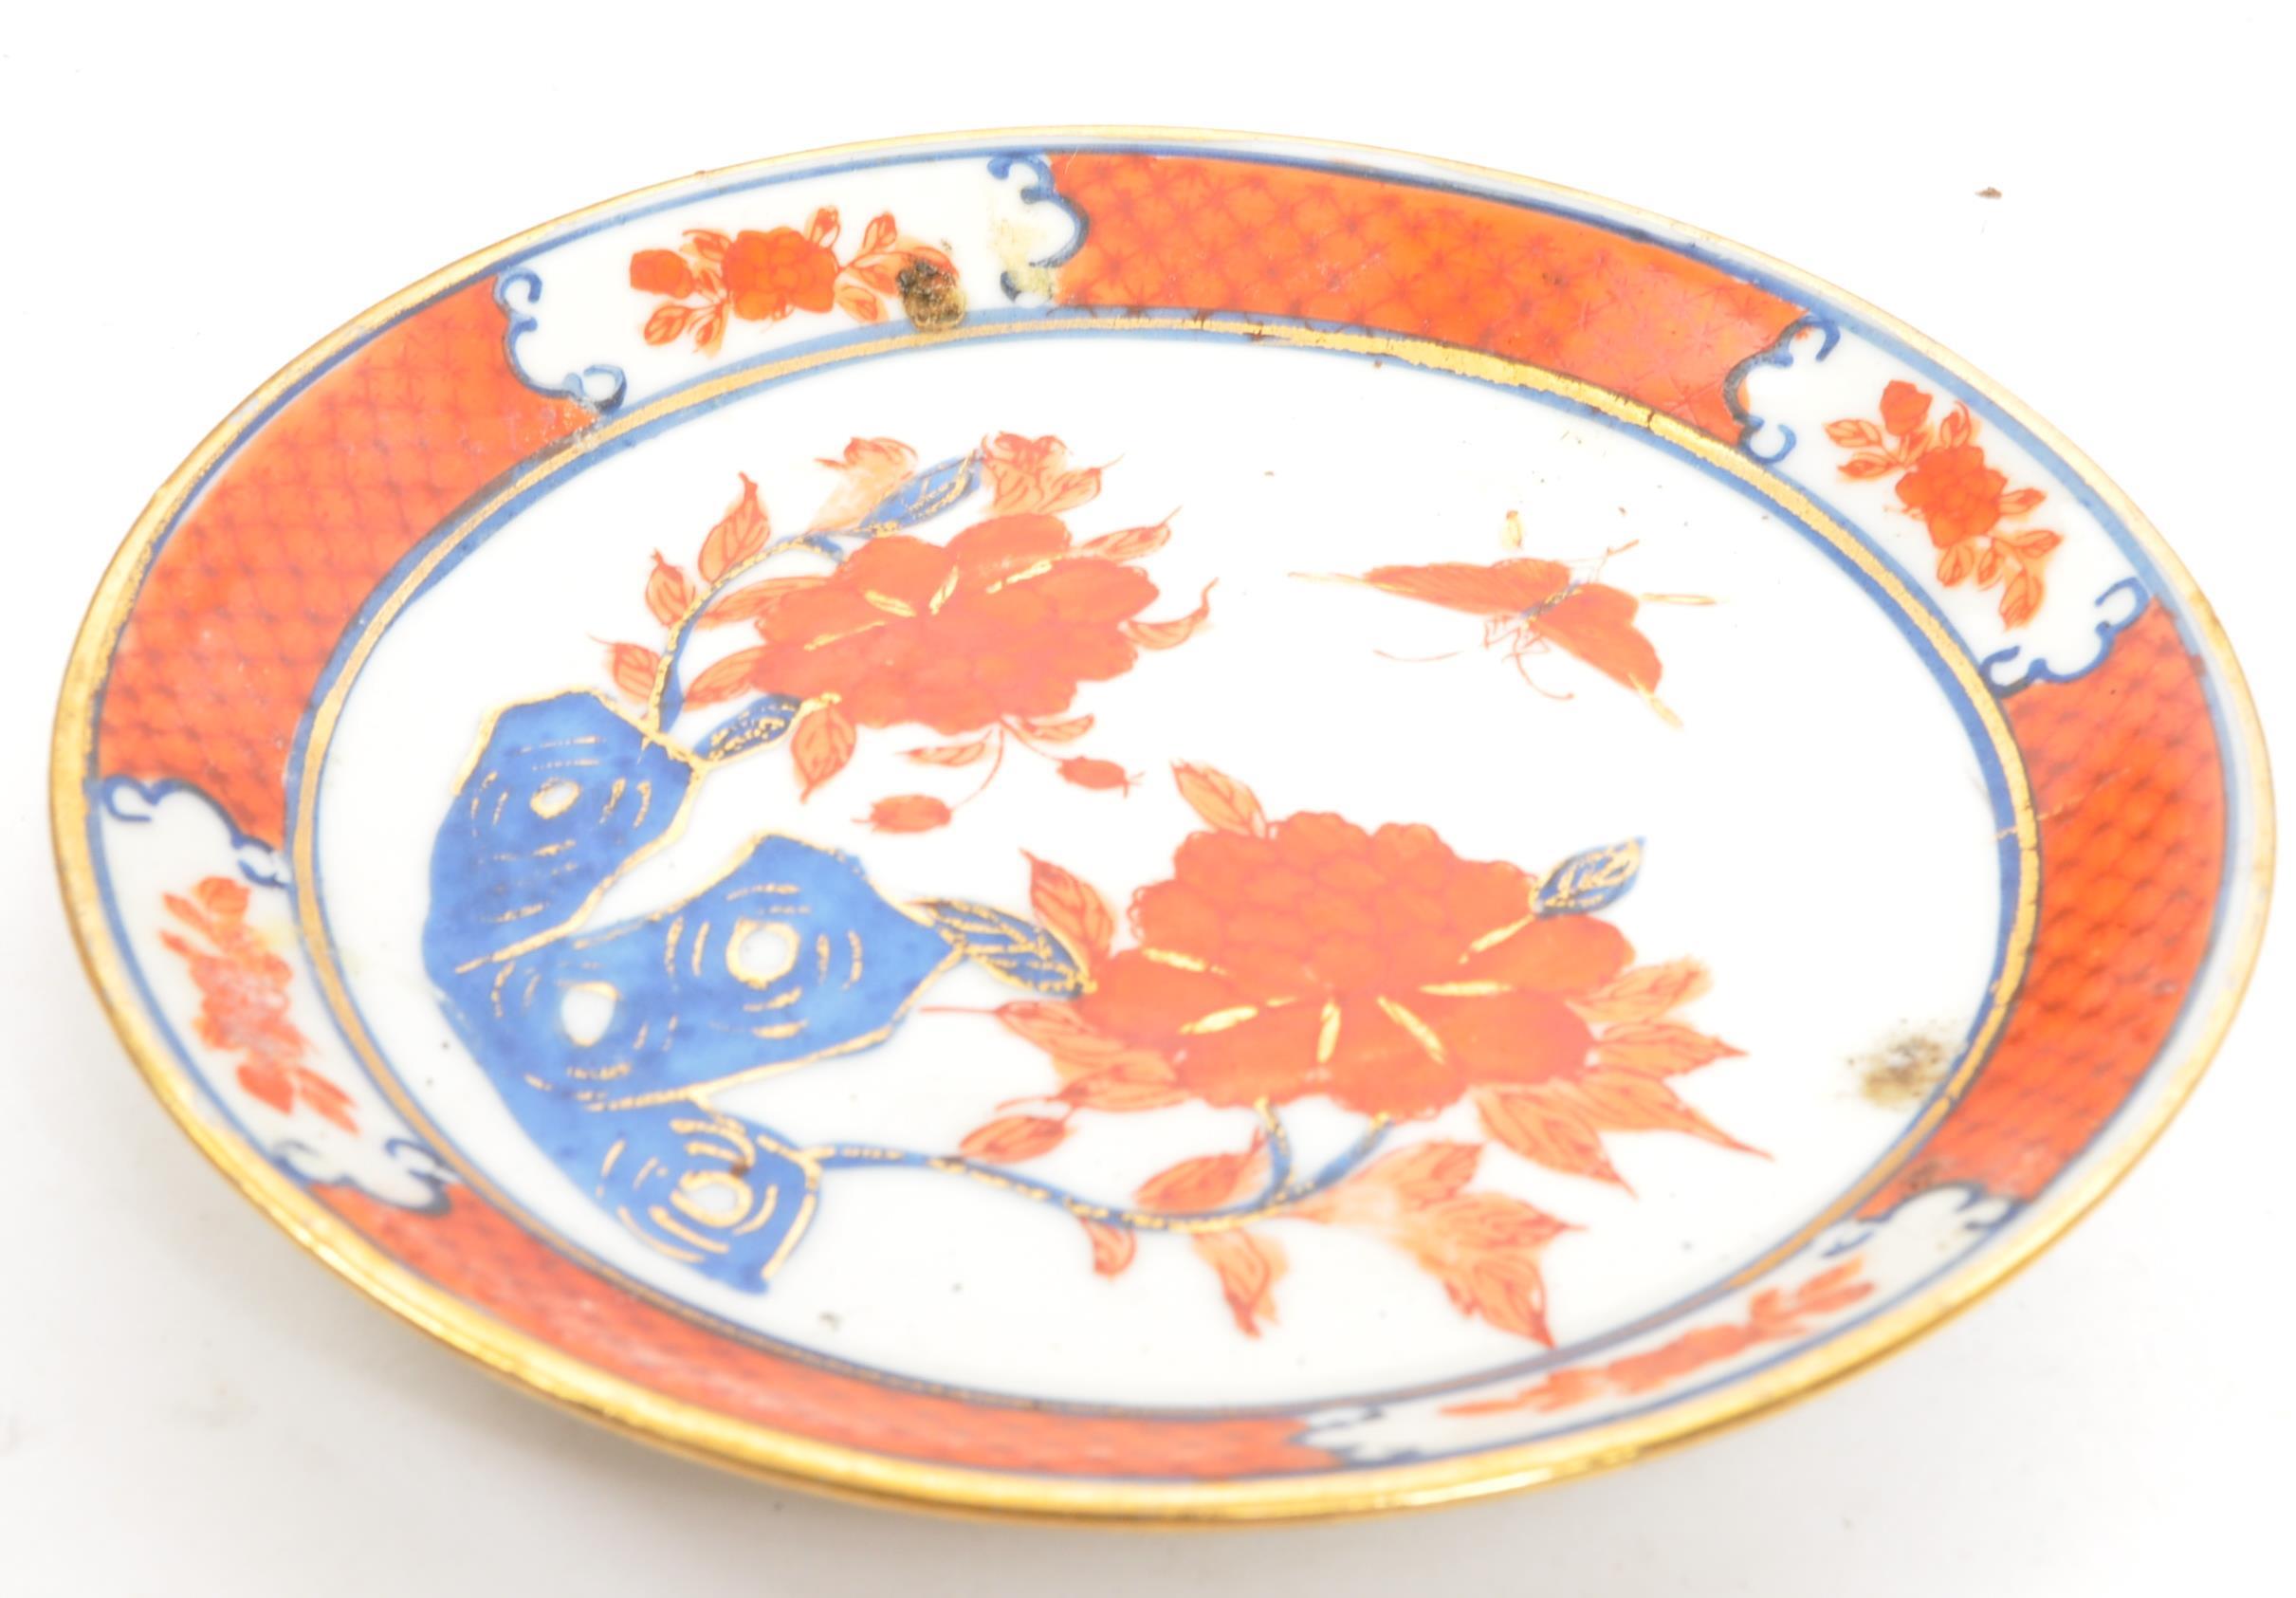 EARLY 20TH CENTURY CHINESE ORIENTAL PORCELAIN DINNER SERVICE - Image 7 of 8